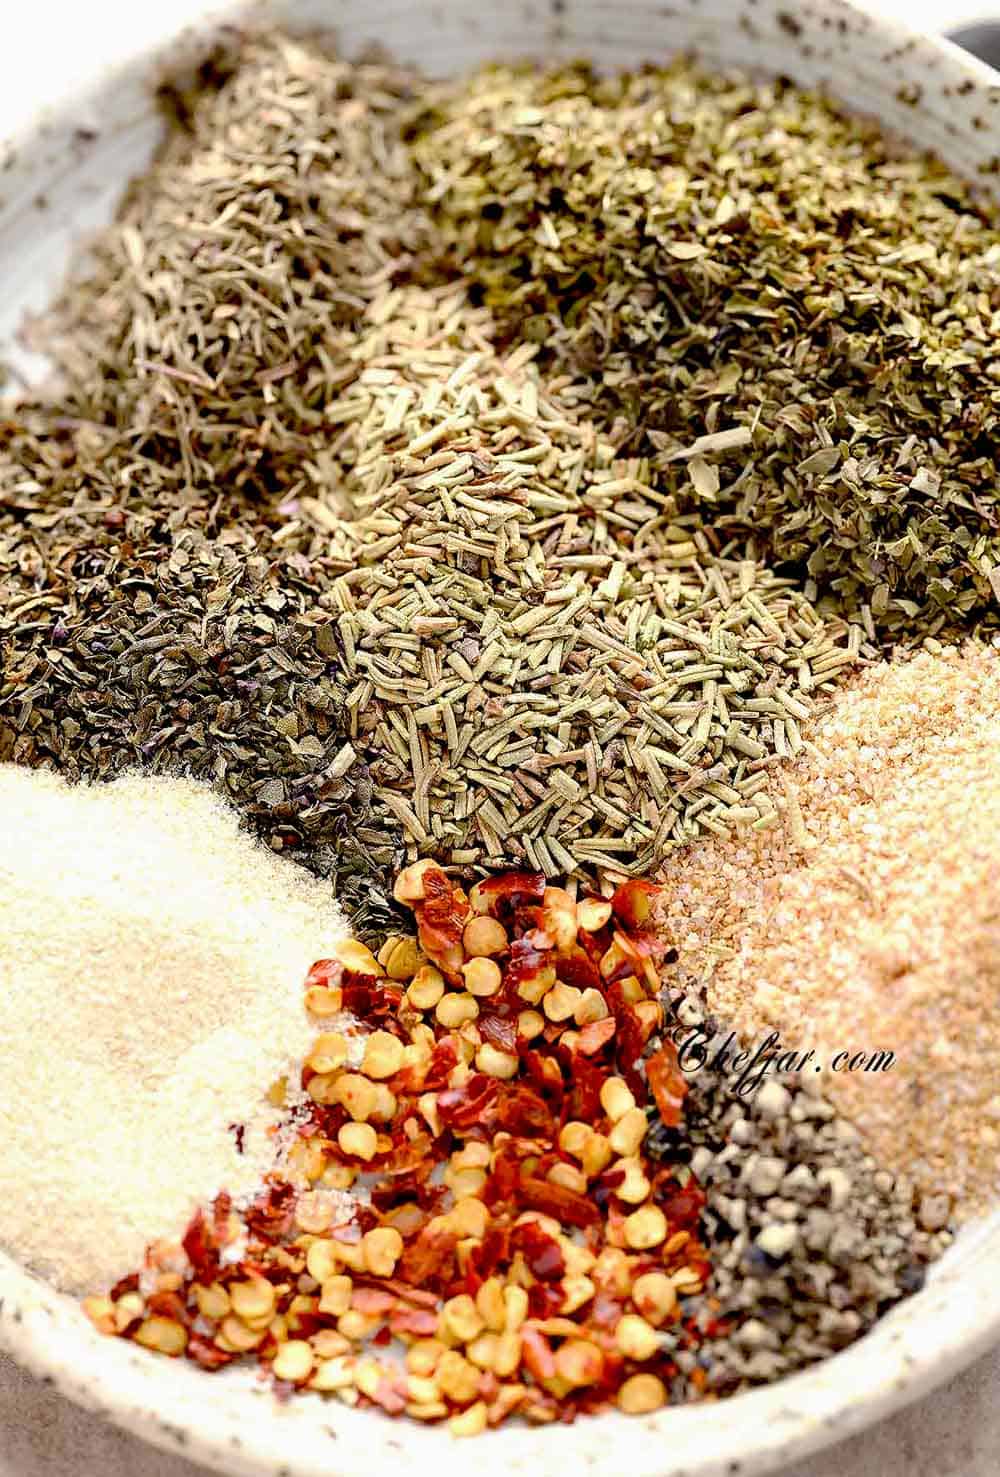 A square image of seasoning blend of spices for spaghetti.